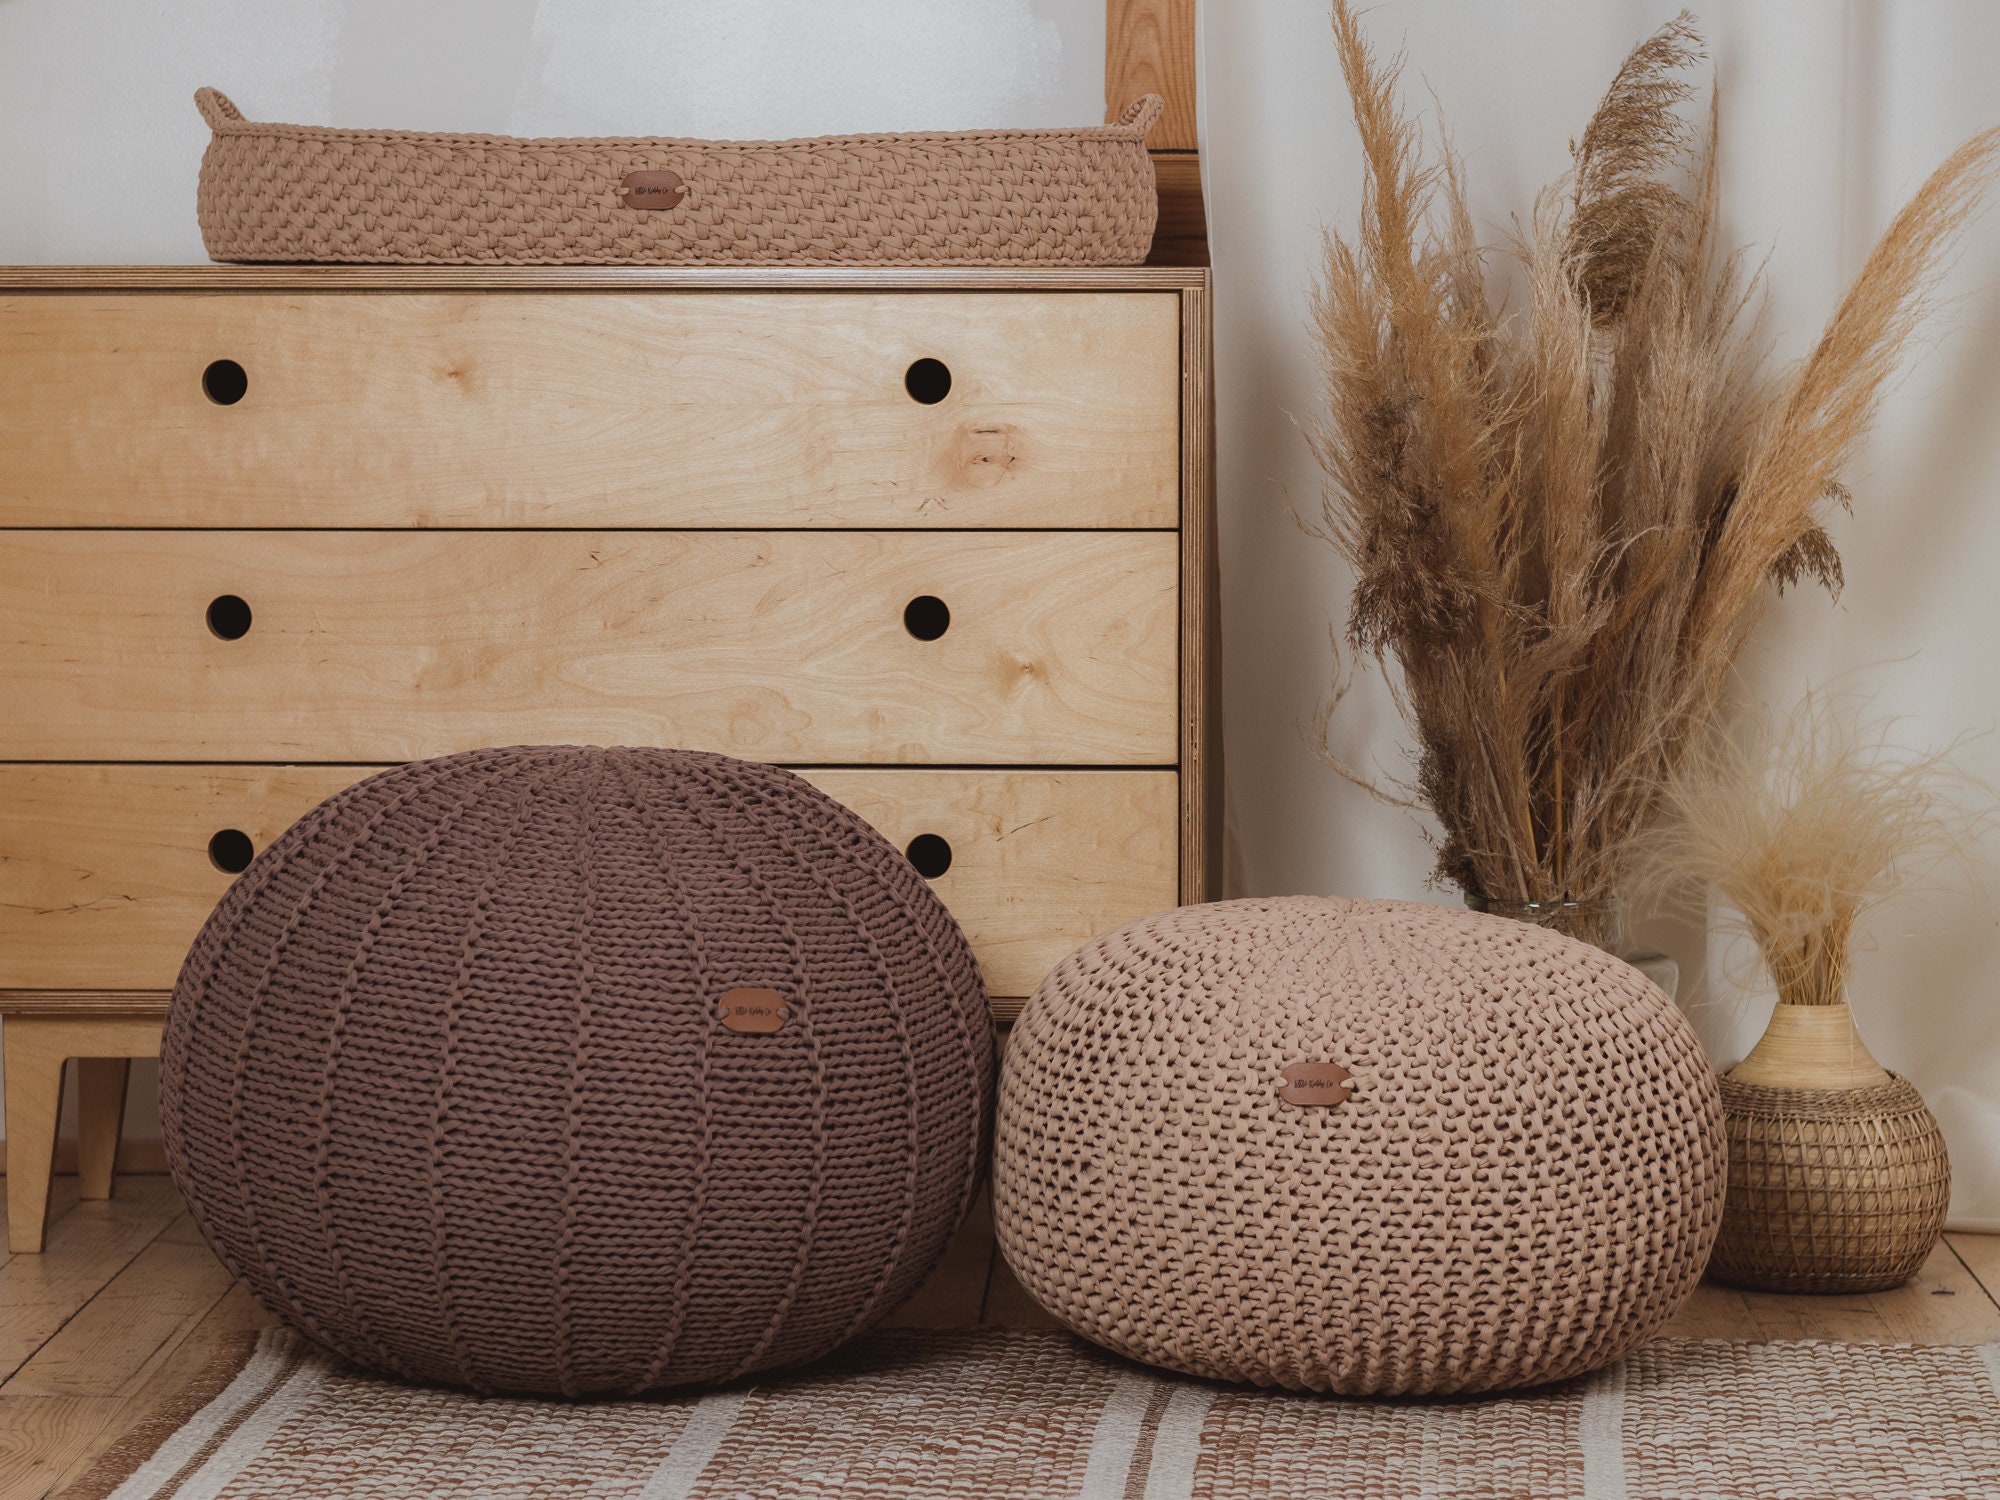 32 x 32 x 42 cm HOMESCAPES Chocolate Brown Cotton Knitted Pouffe Footstool with Wooden Legs 